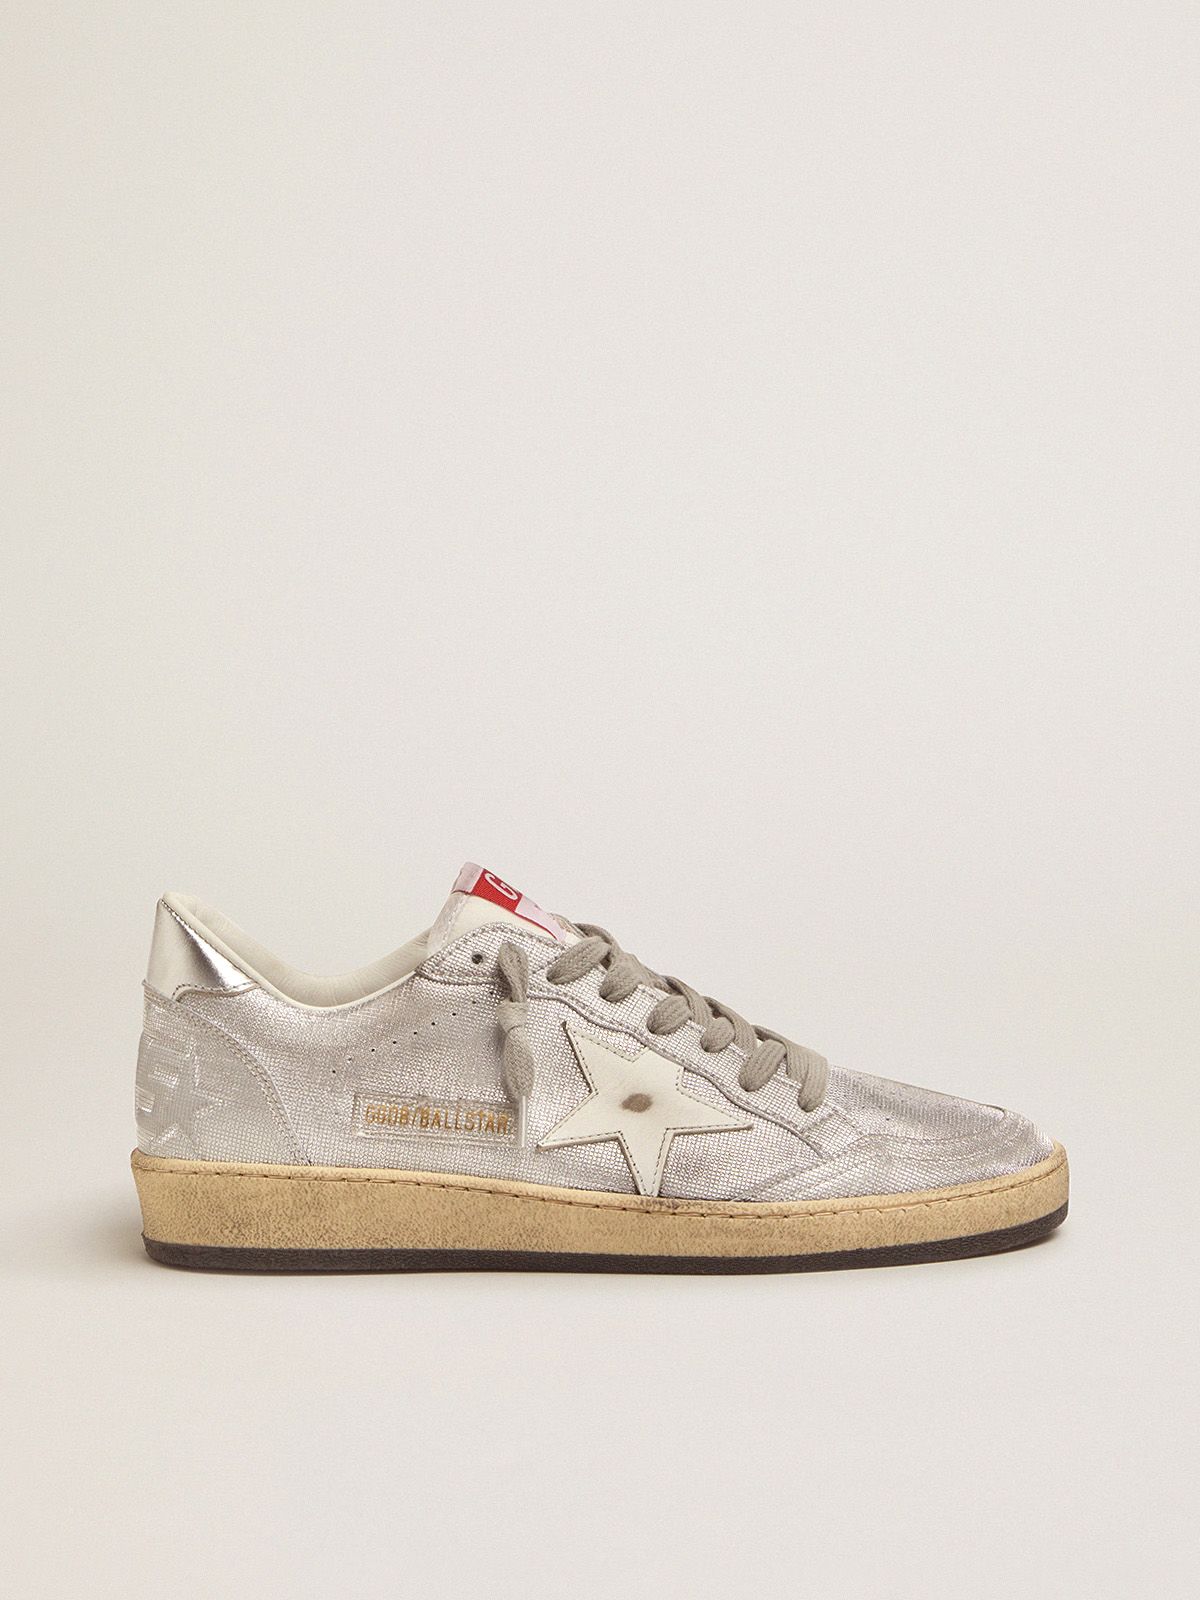 Golden Goose Sneakers Donna Ball Star LTD sneakers in silver leather